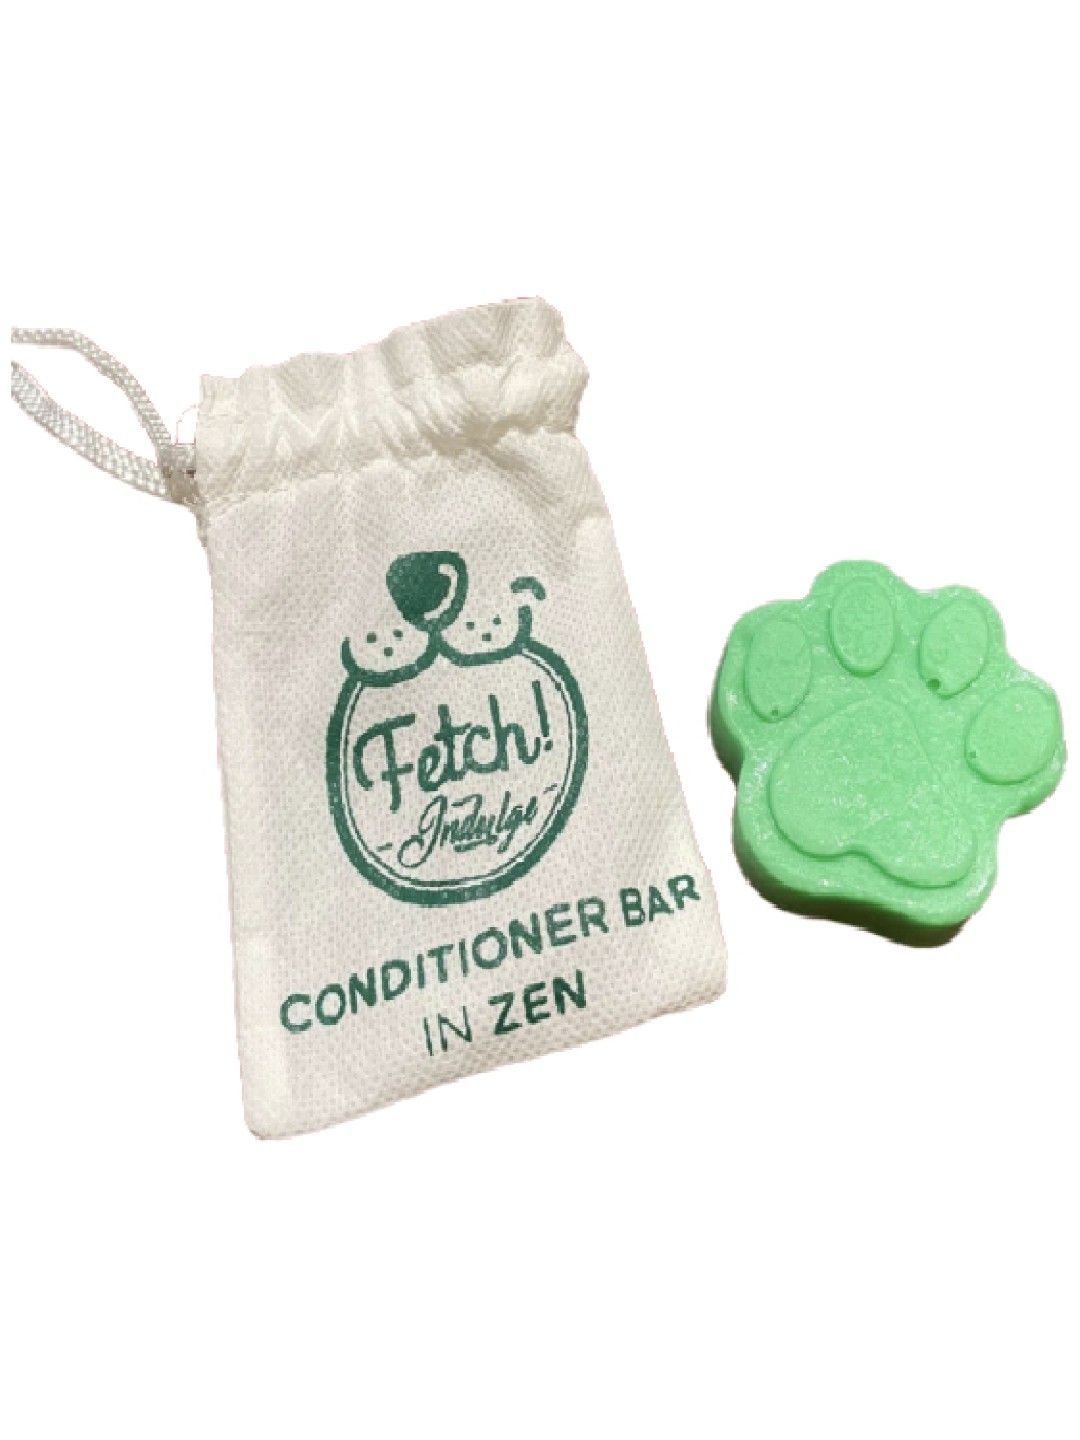 Fetch! Naturals Indulge Conditioner Bars for Dogs and Cats